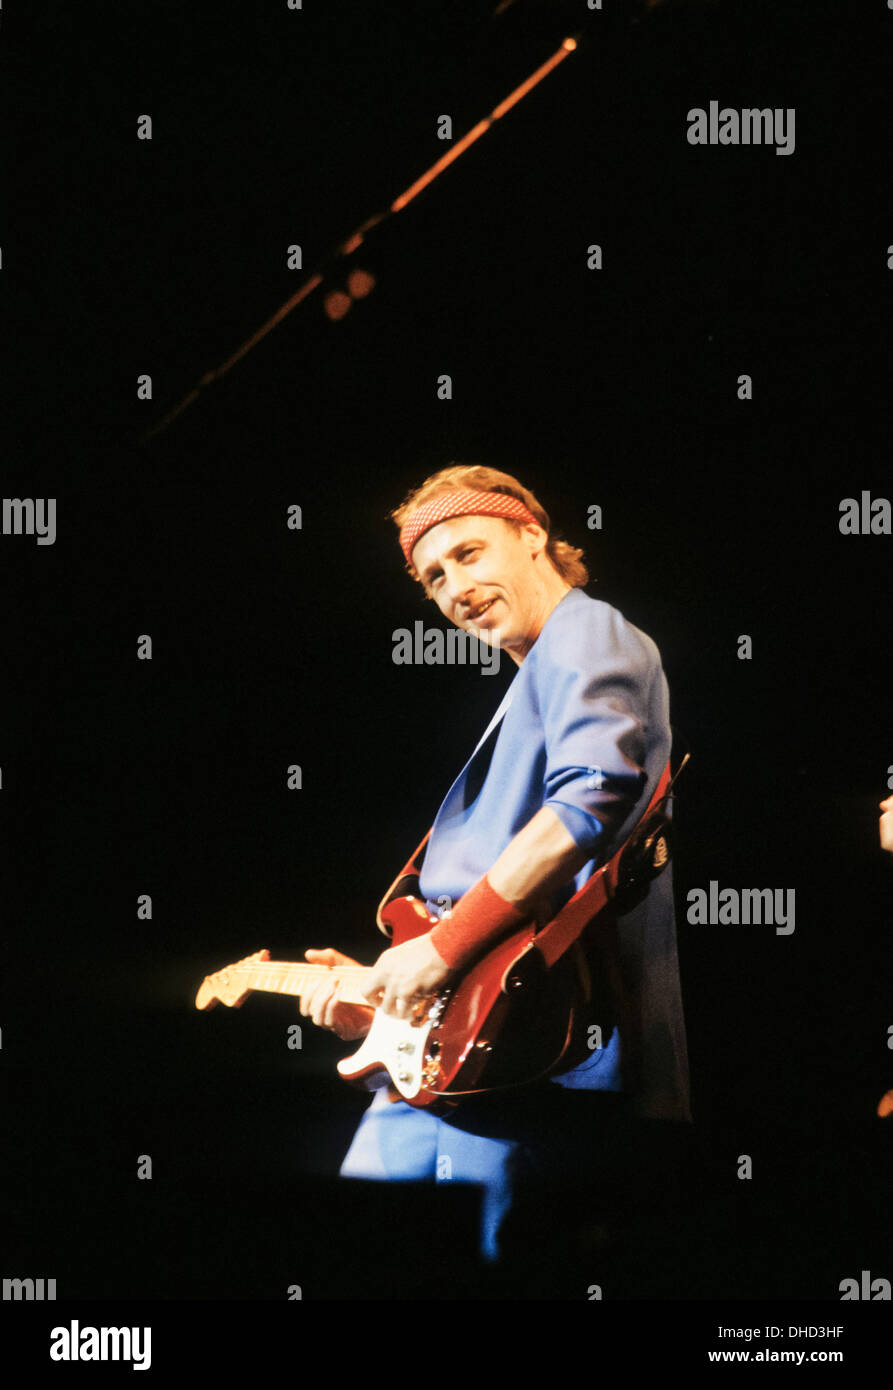 Mark Knopfler - Mark photographed during @Dire Straits' rehearsals for  AVRO's Platengala at Ahoy in Rotterdam, Netherlands on October 12th 1983.  Photo by Rob Verhorst